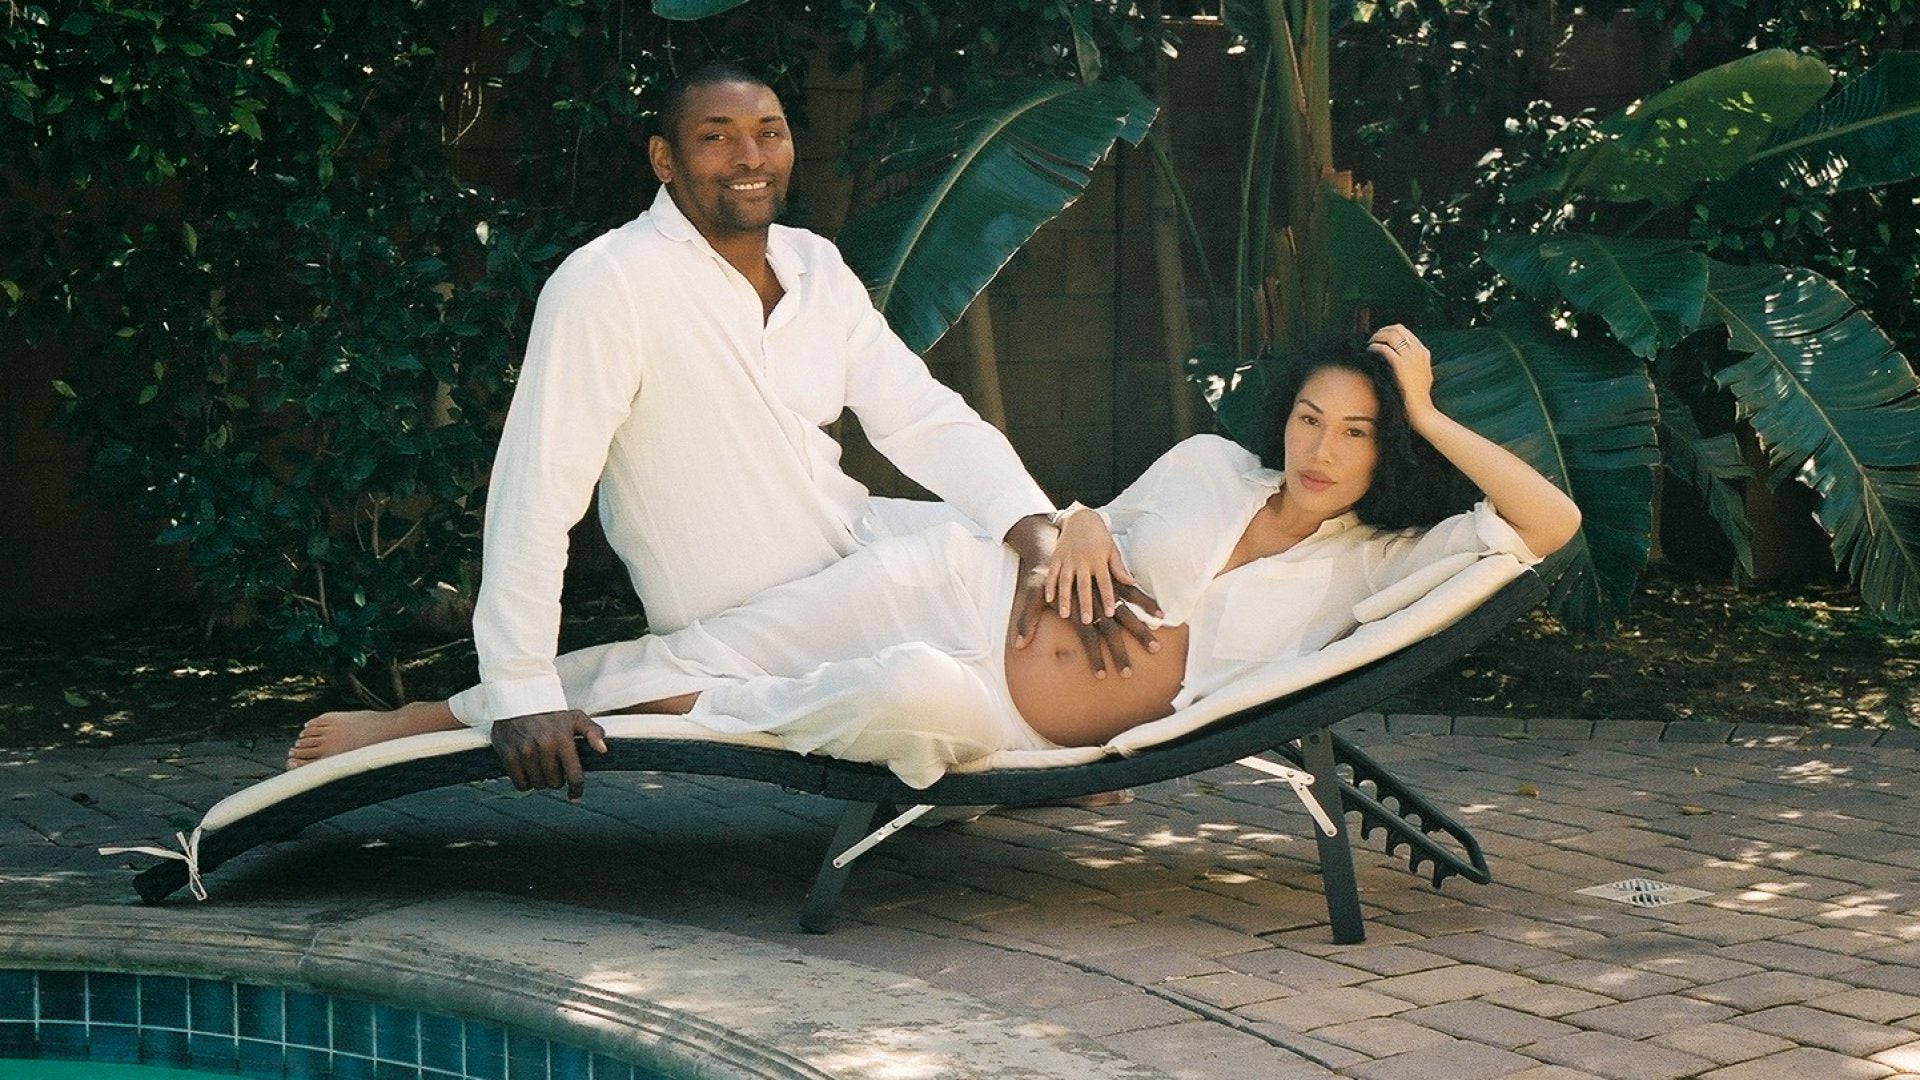 Exclusive: Former NBA Star Metta World Peace And Wife Maya Share Images From Gorgeous Maternity Shoot